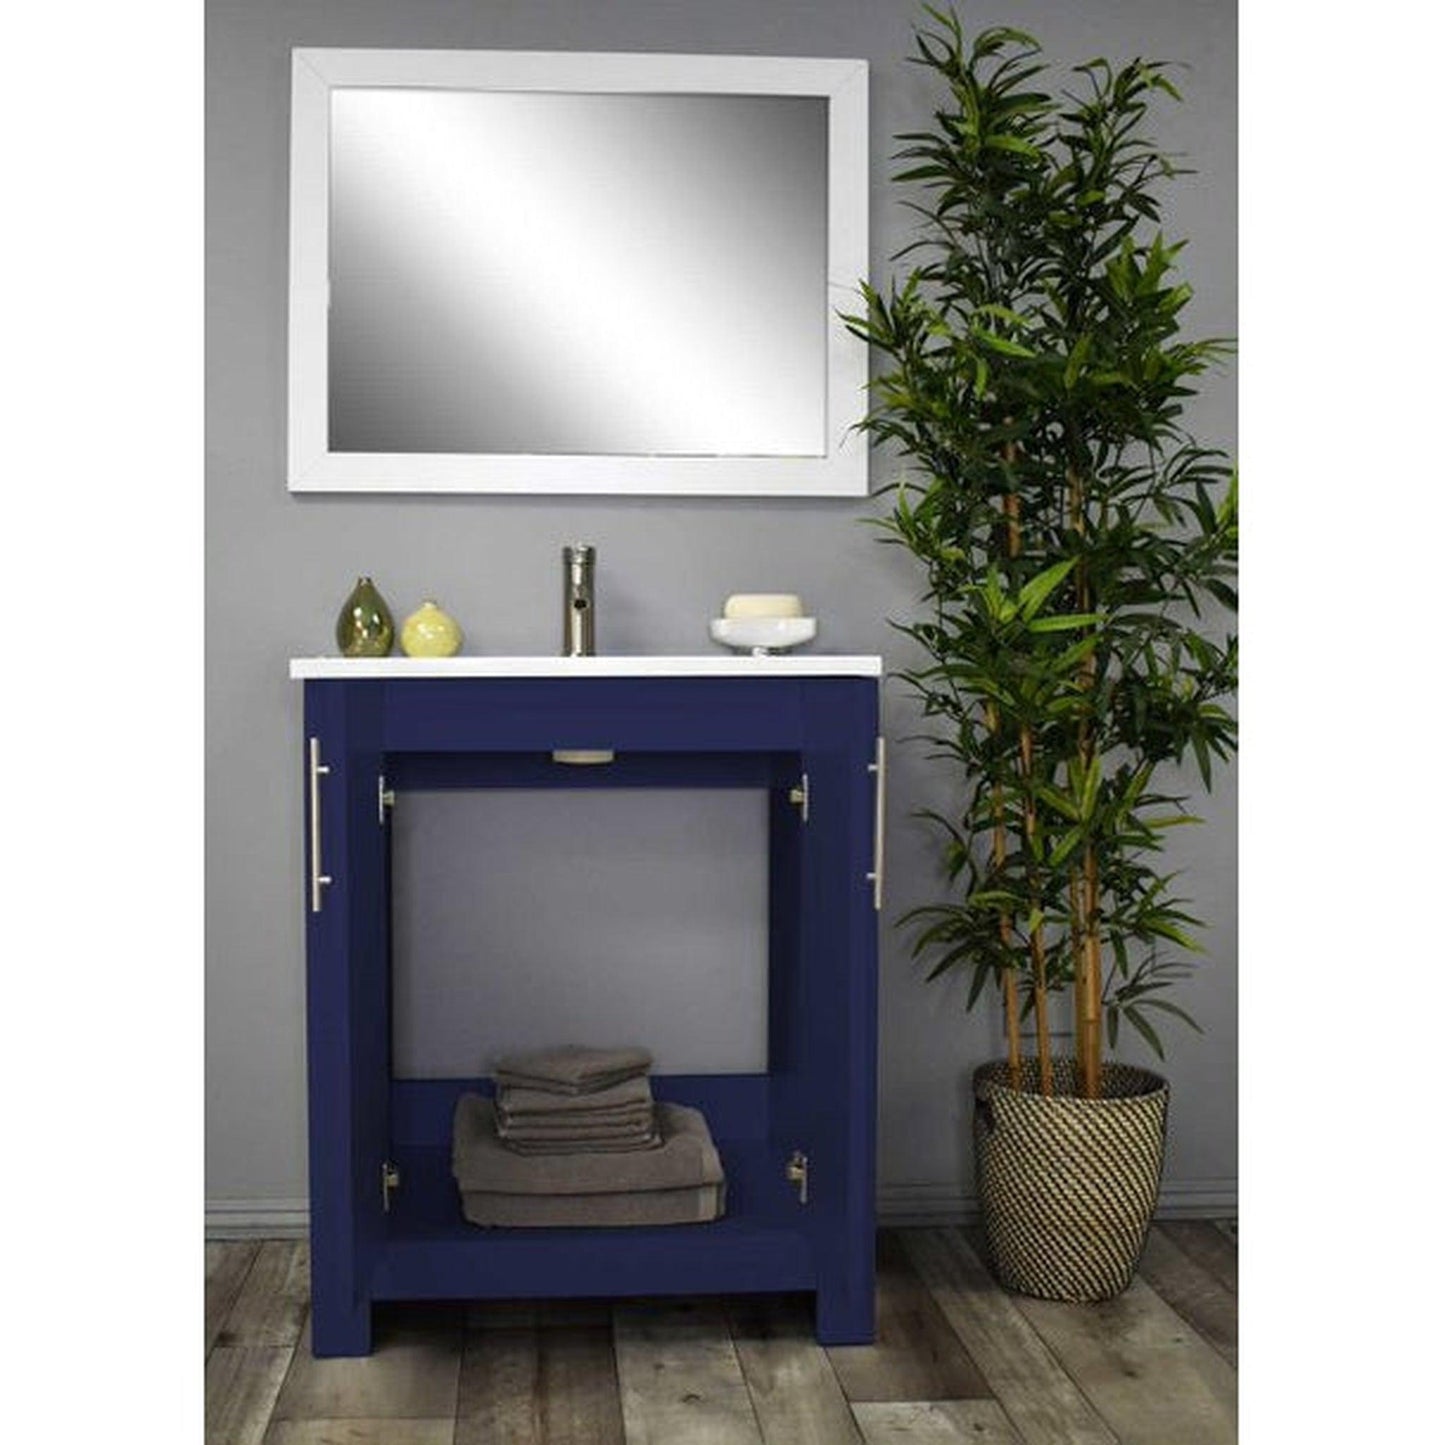 Volpa USA Austin 24" x 20" Navy Modern Freestanding Bathroom Vanity With Acrylic Top, Integrated Acrylic Sink And Brushed Nickel Handles